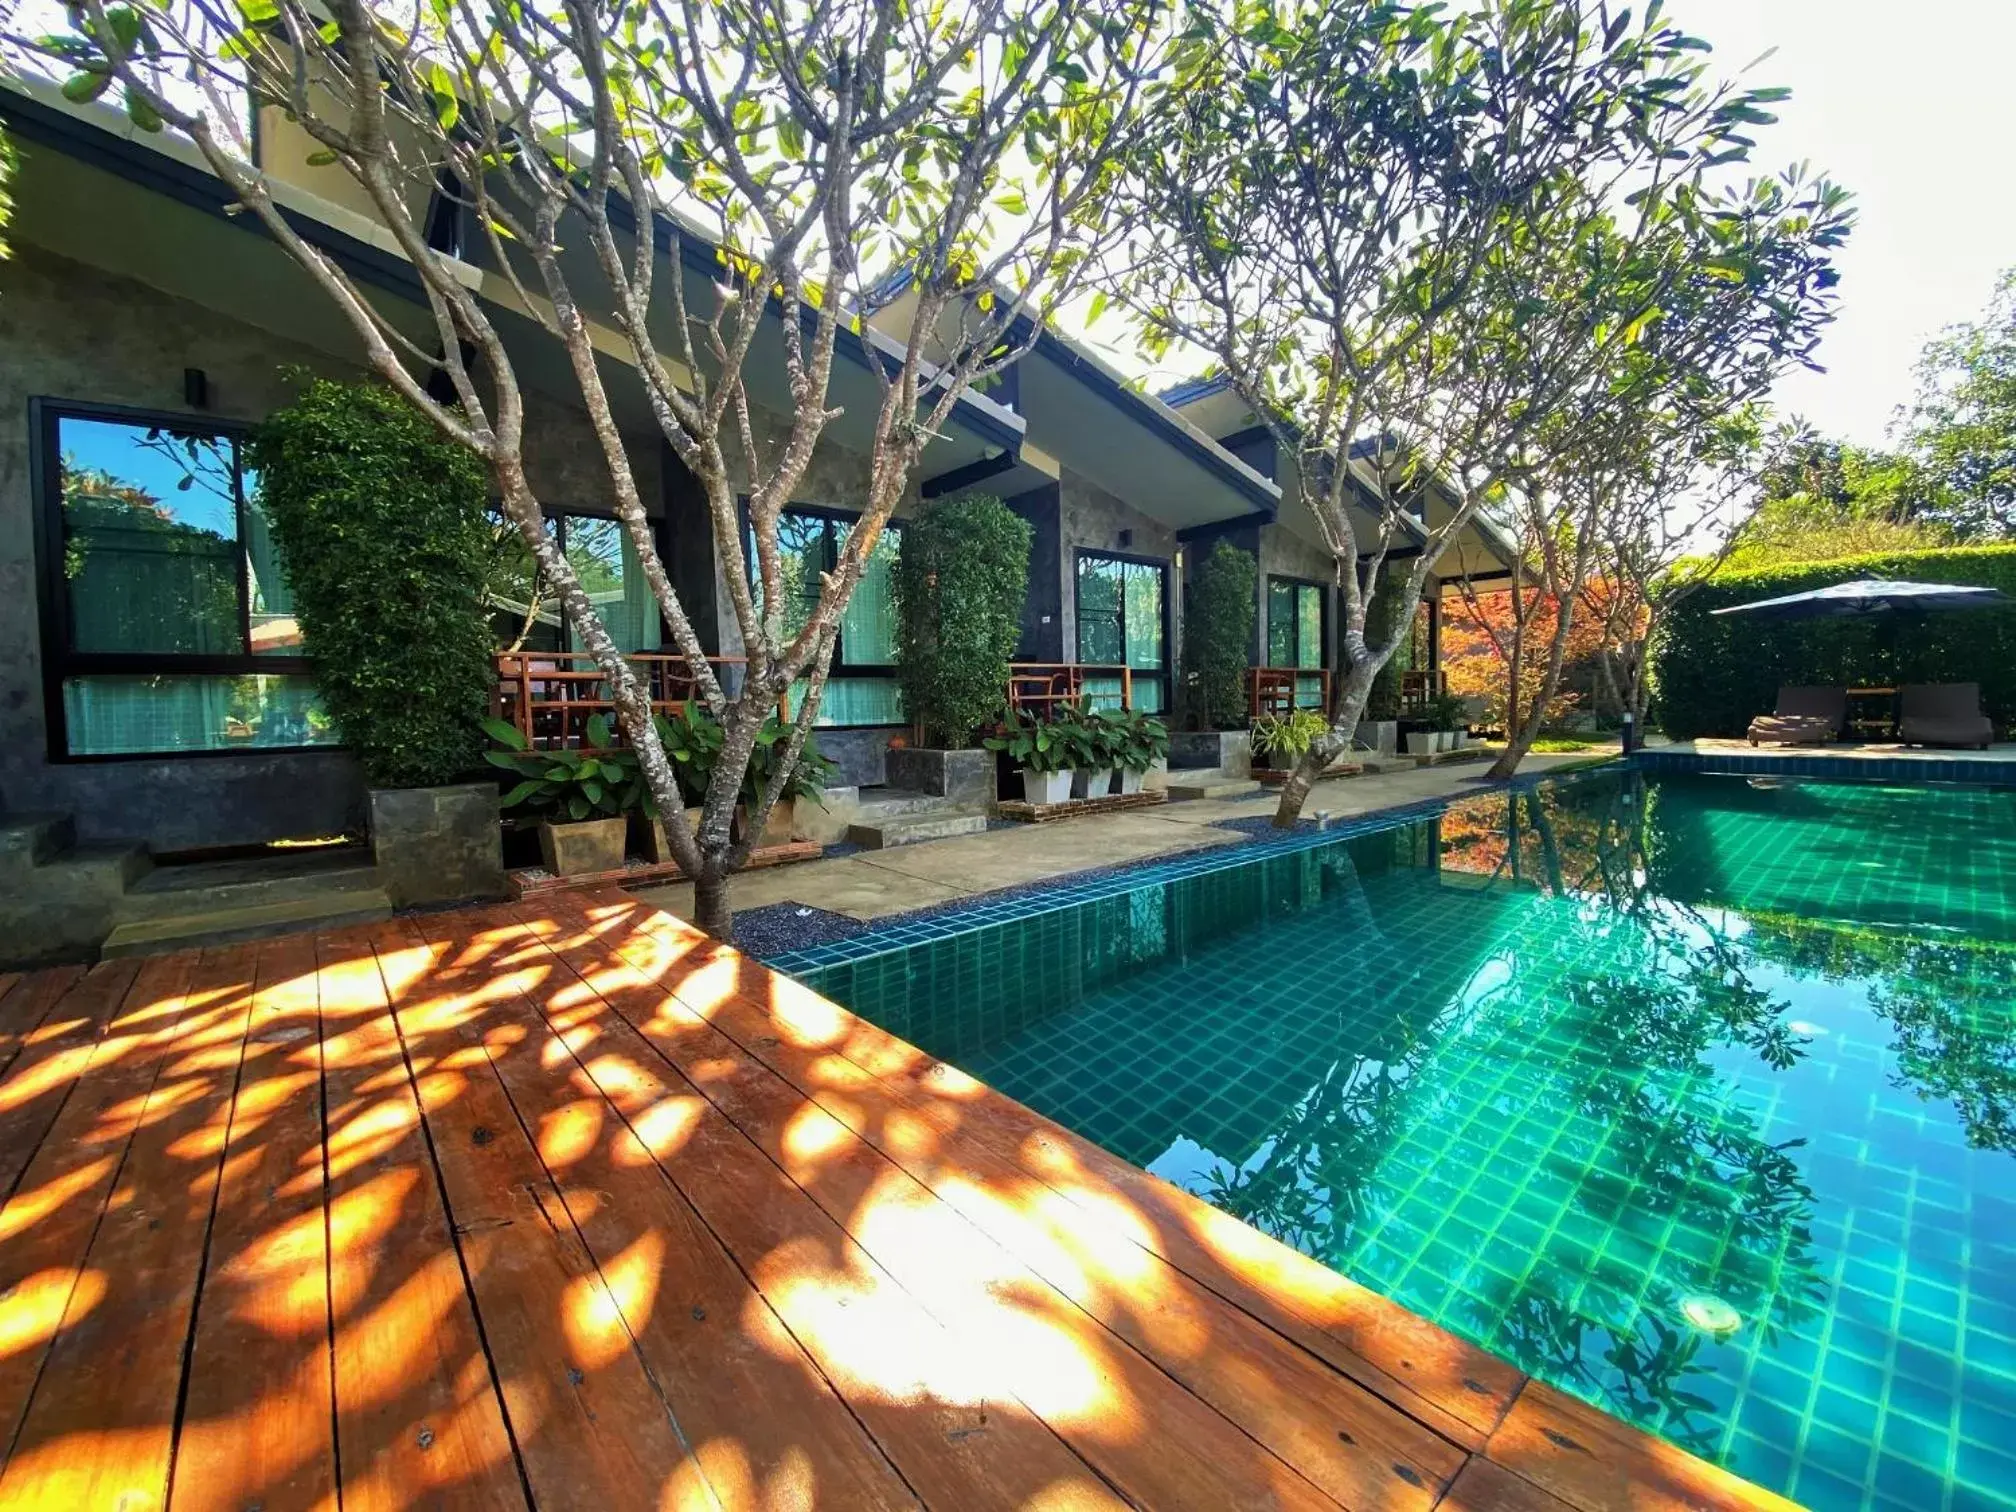 Property building, Swimming Pool in Family House Zen Boutique Resort